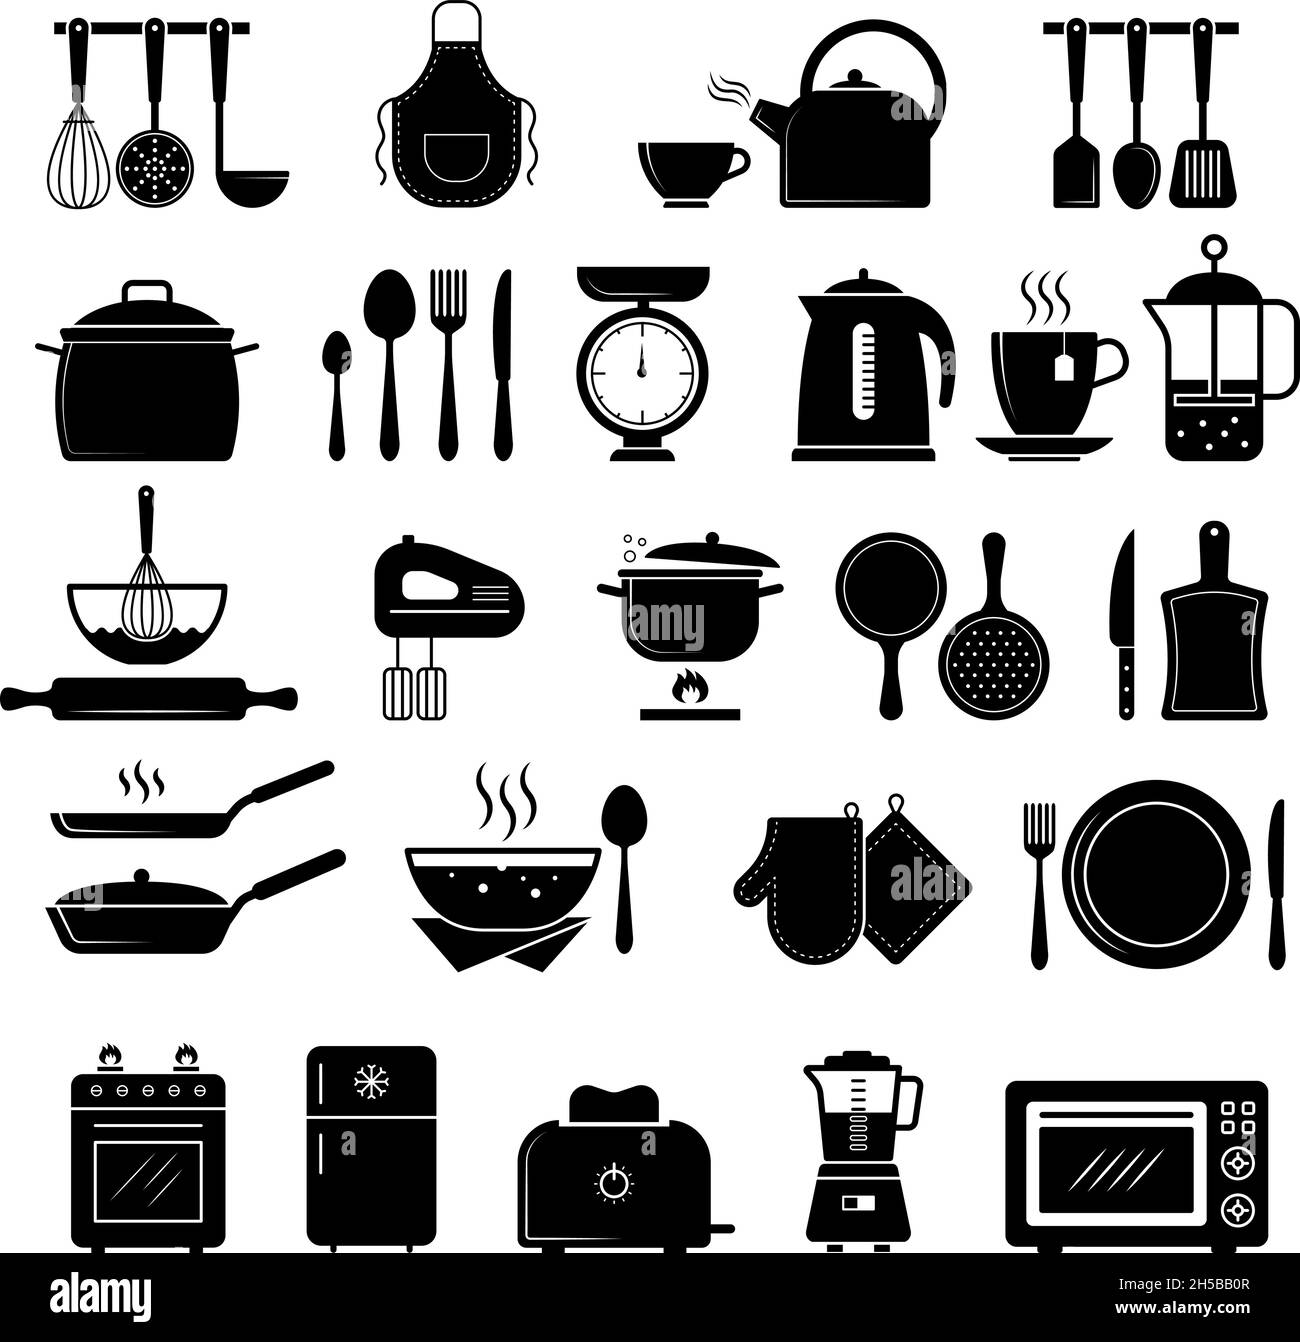 Kitchen icon. Food cooking utensils whisk stove knife silhouettes recent vector symbols Stock Vector